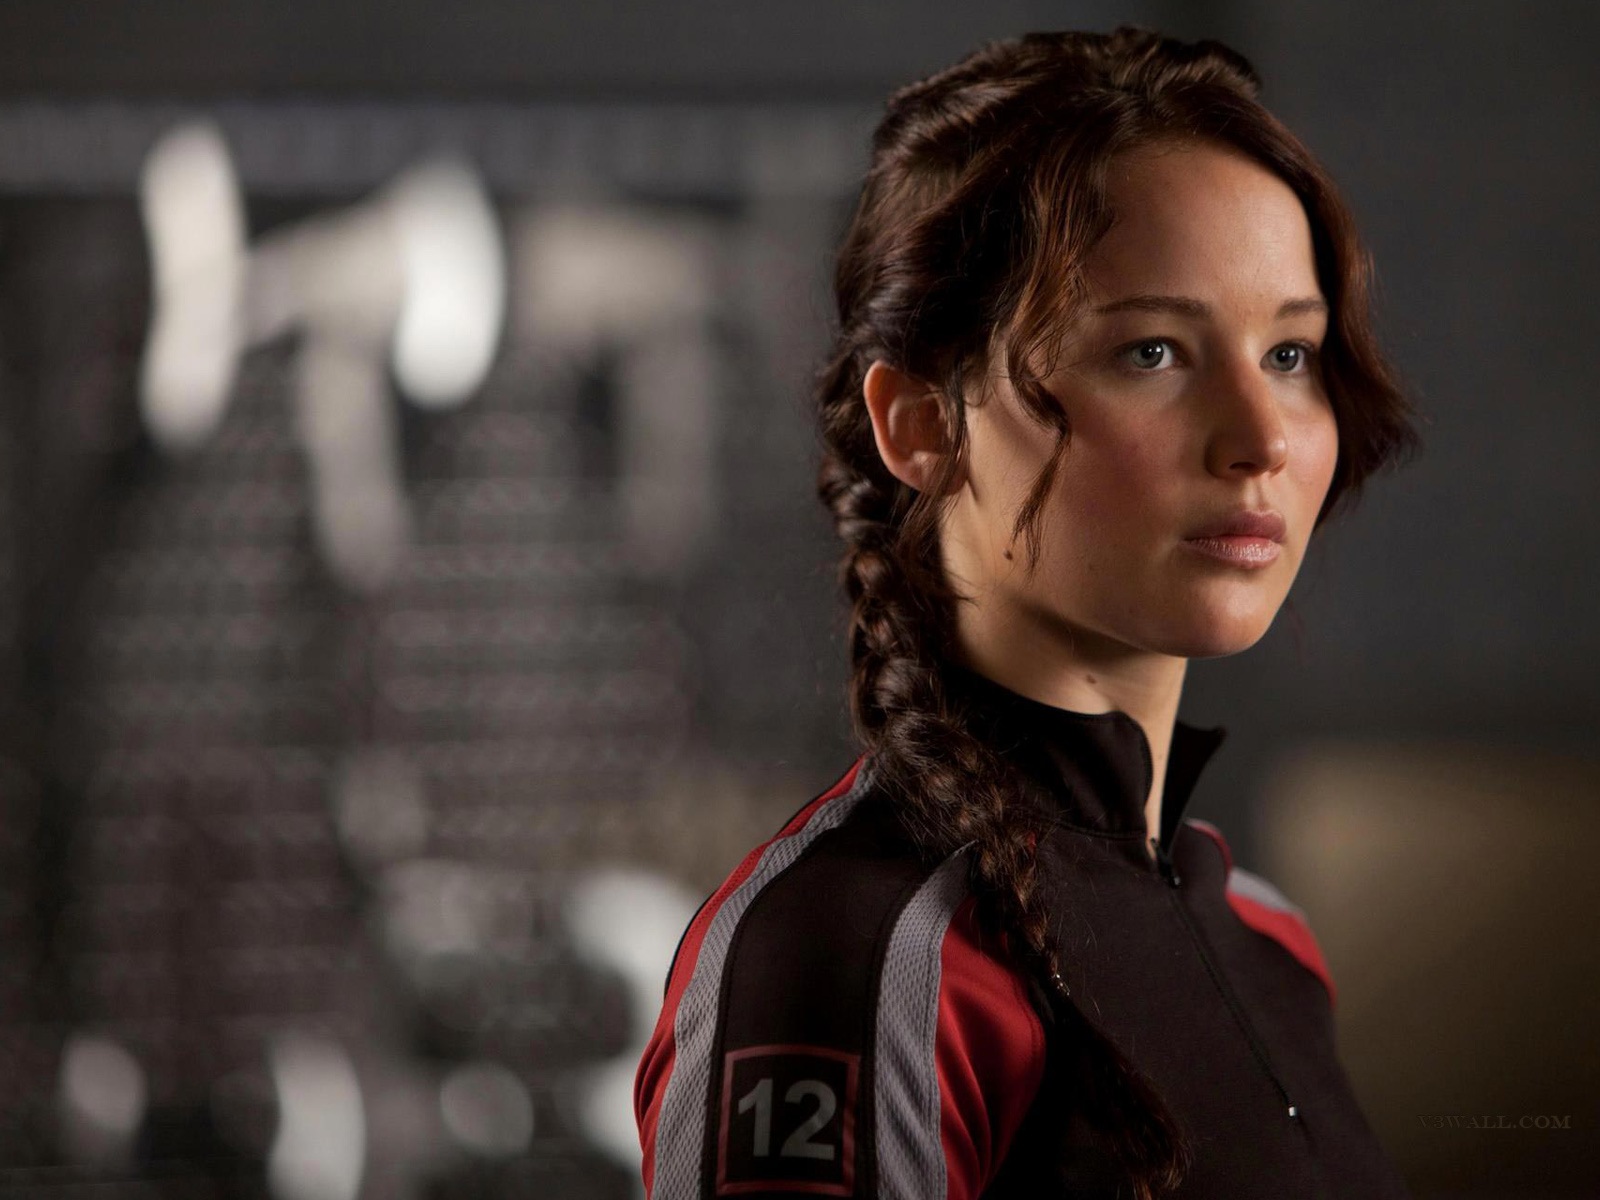 The Hunger Games: Catching Fire wallpapers HD #5 - 1600x1200